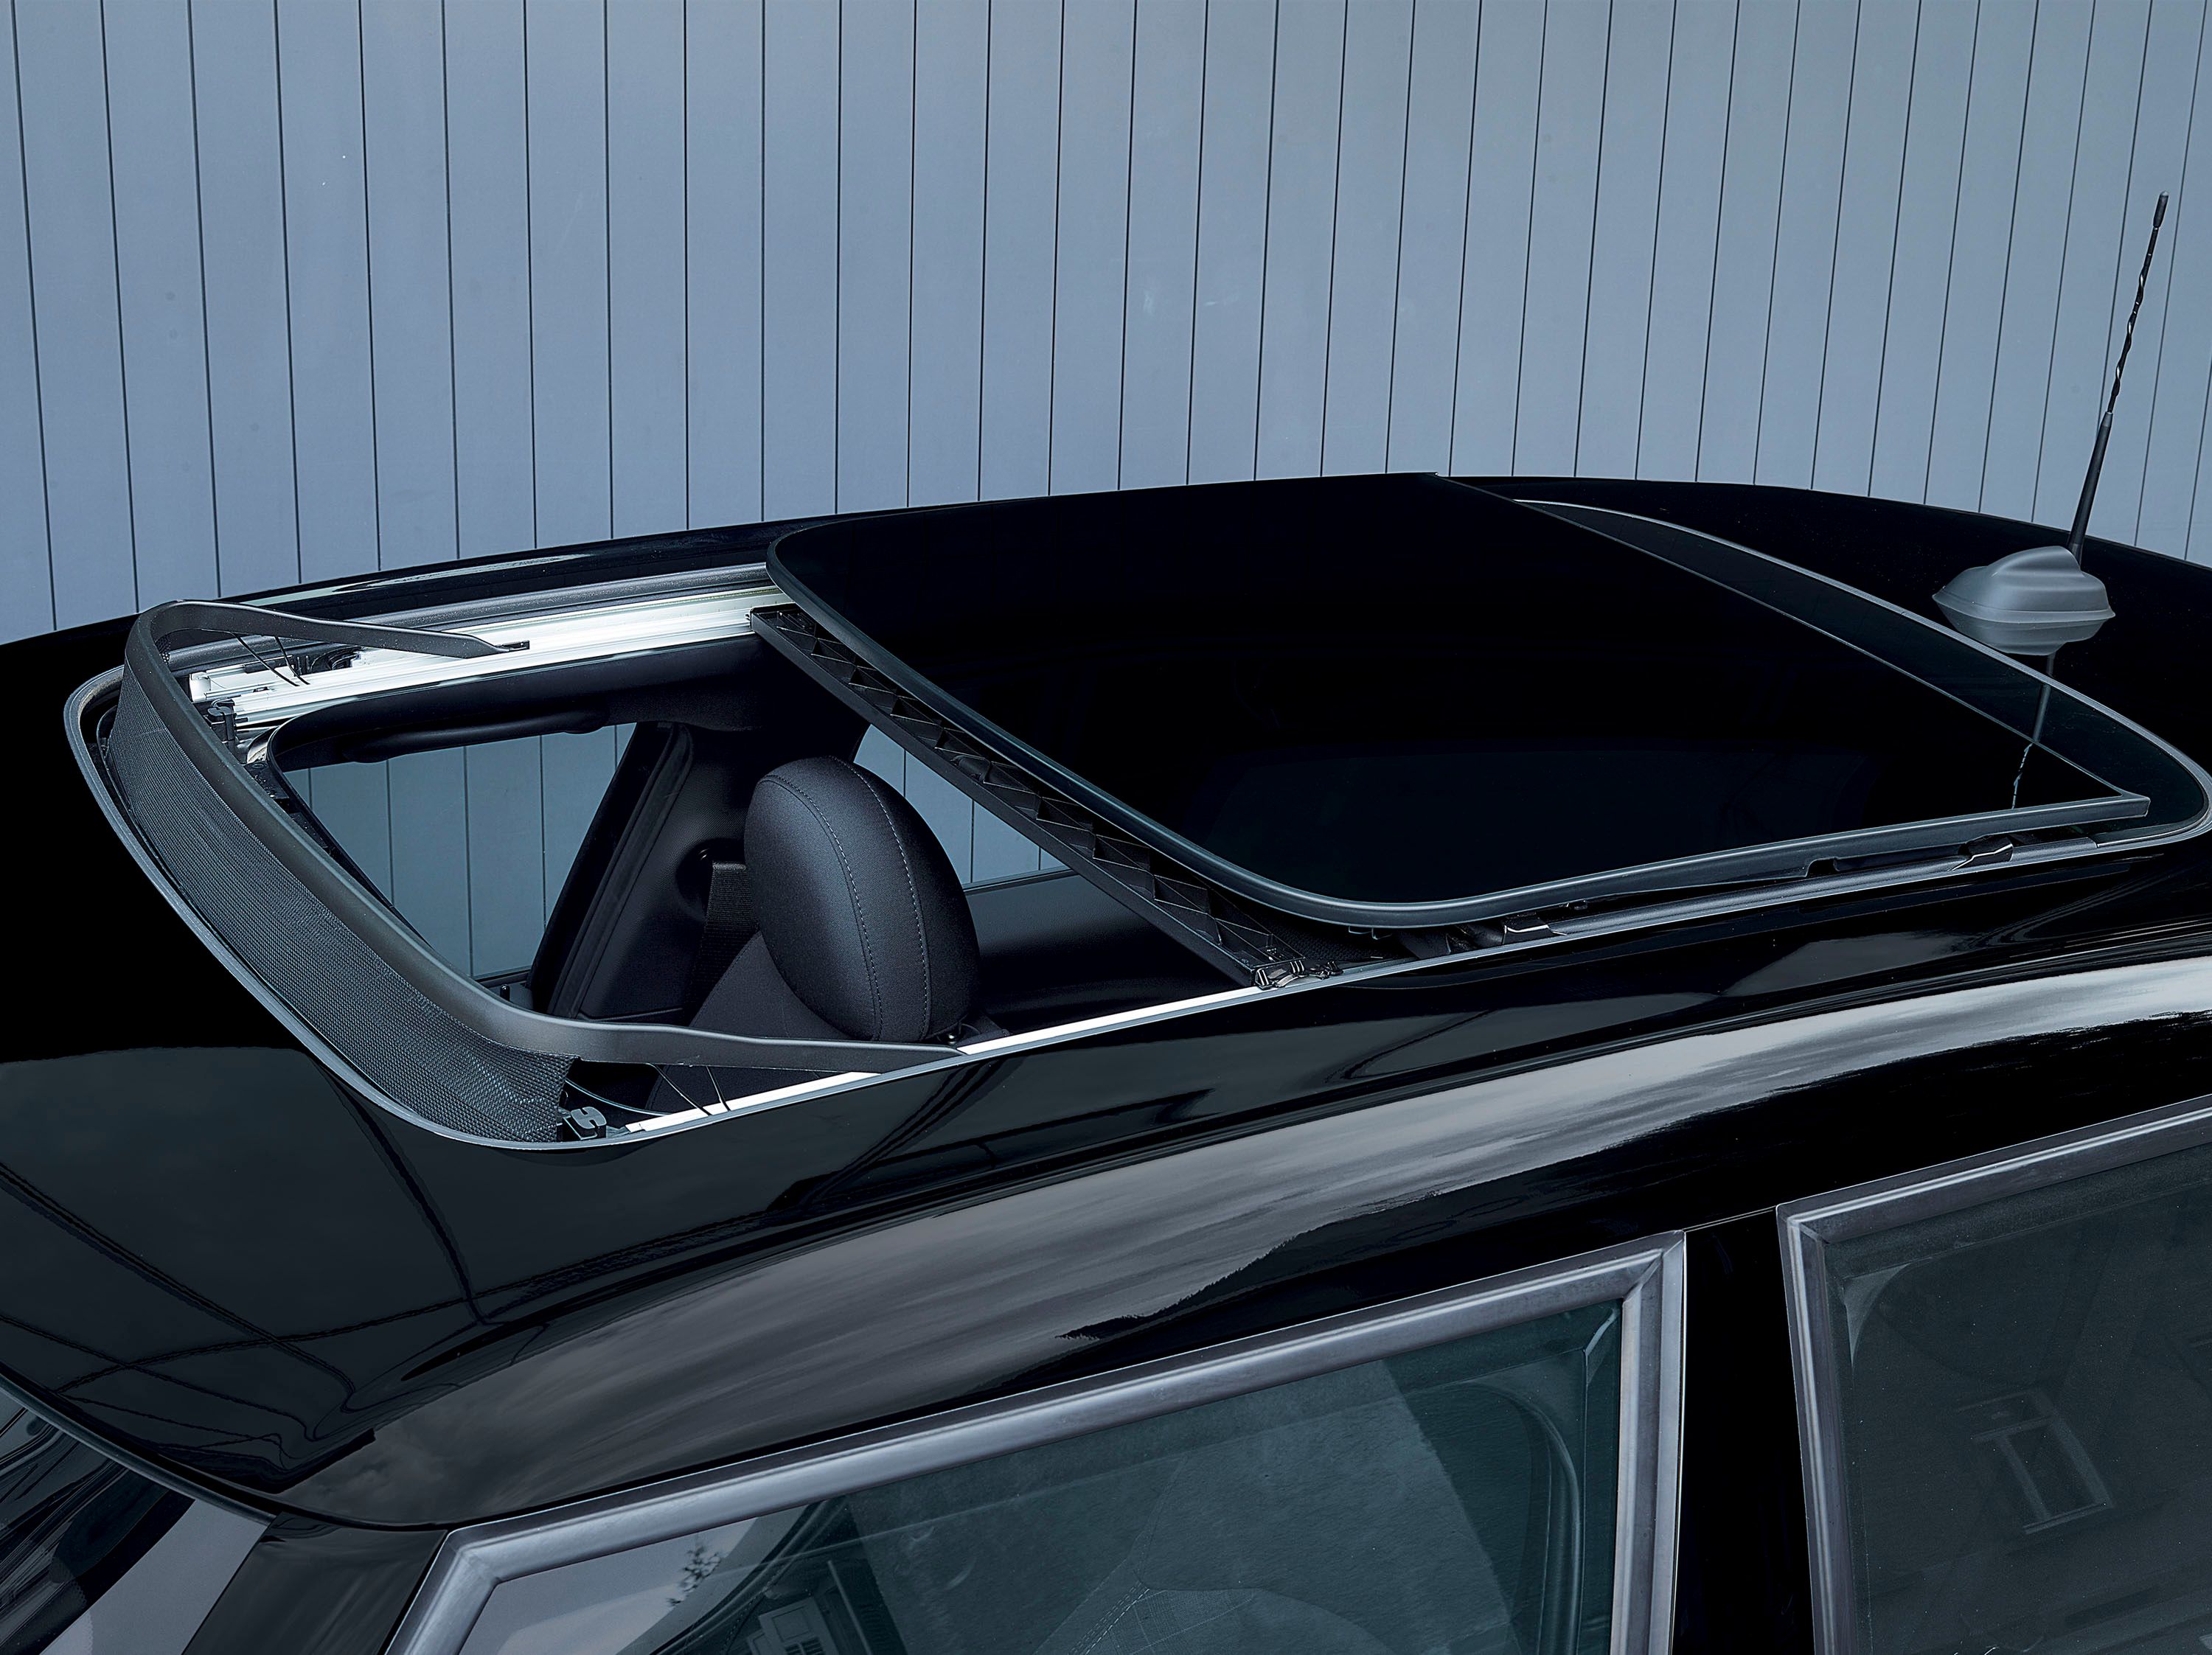  Panoramic sunroof comes standard